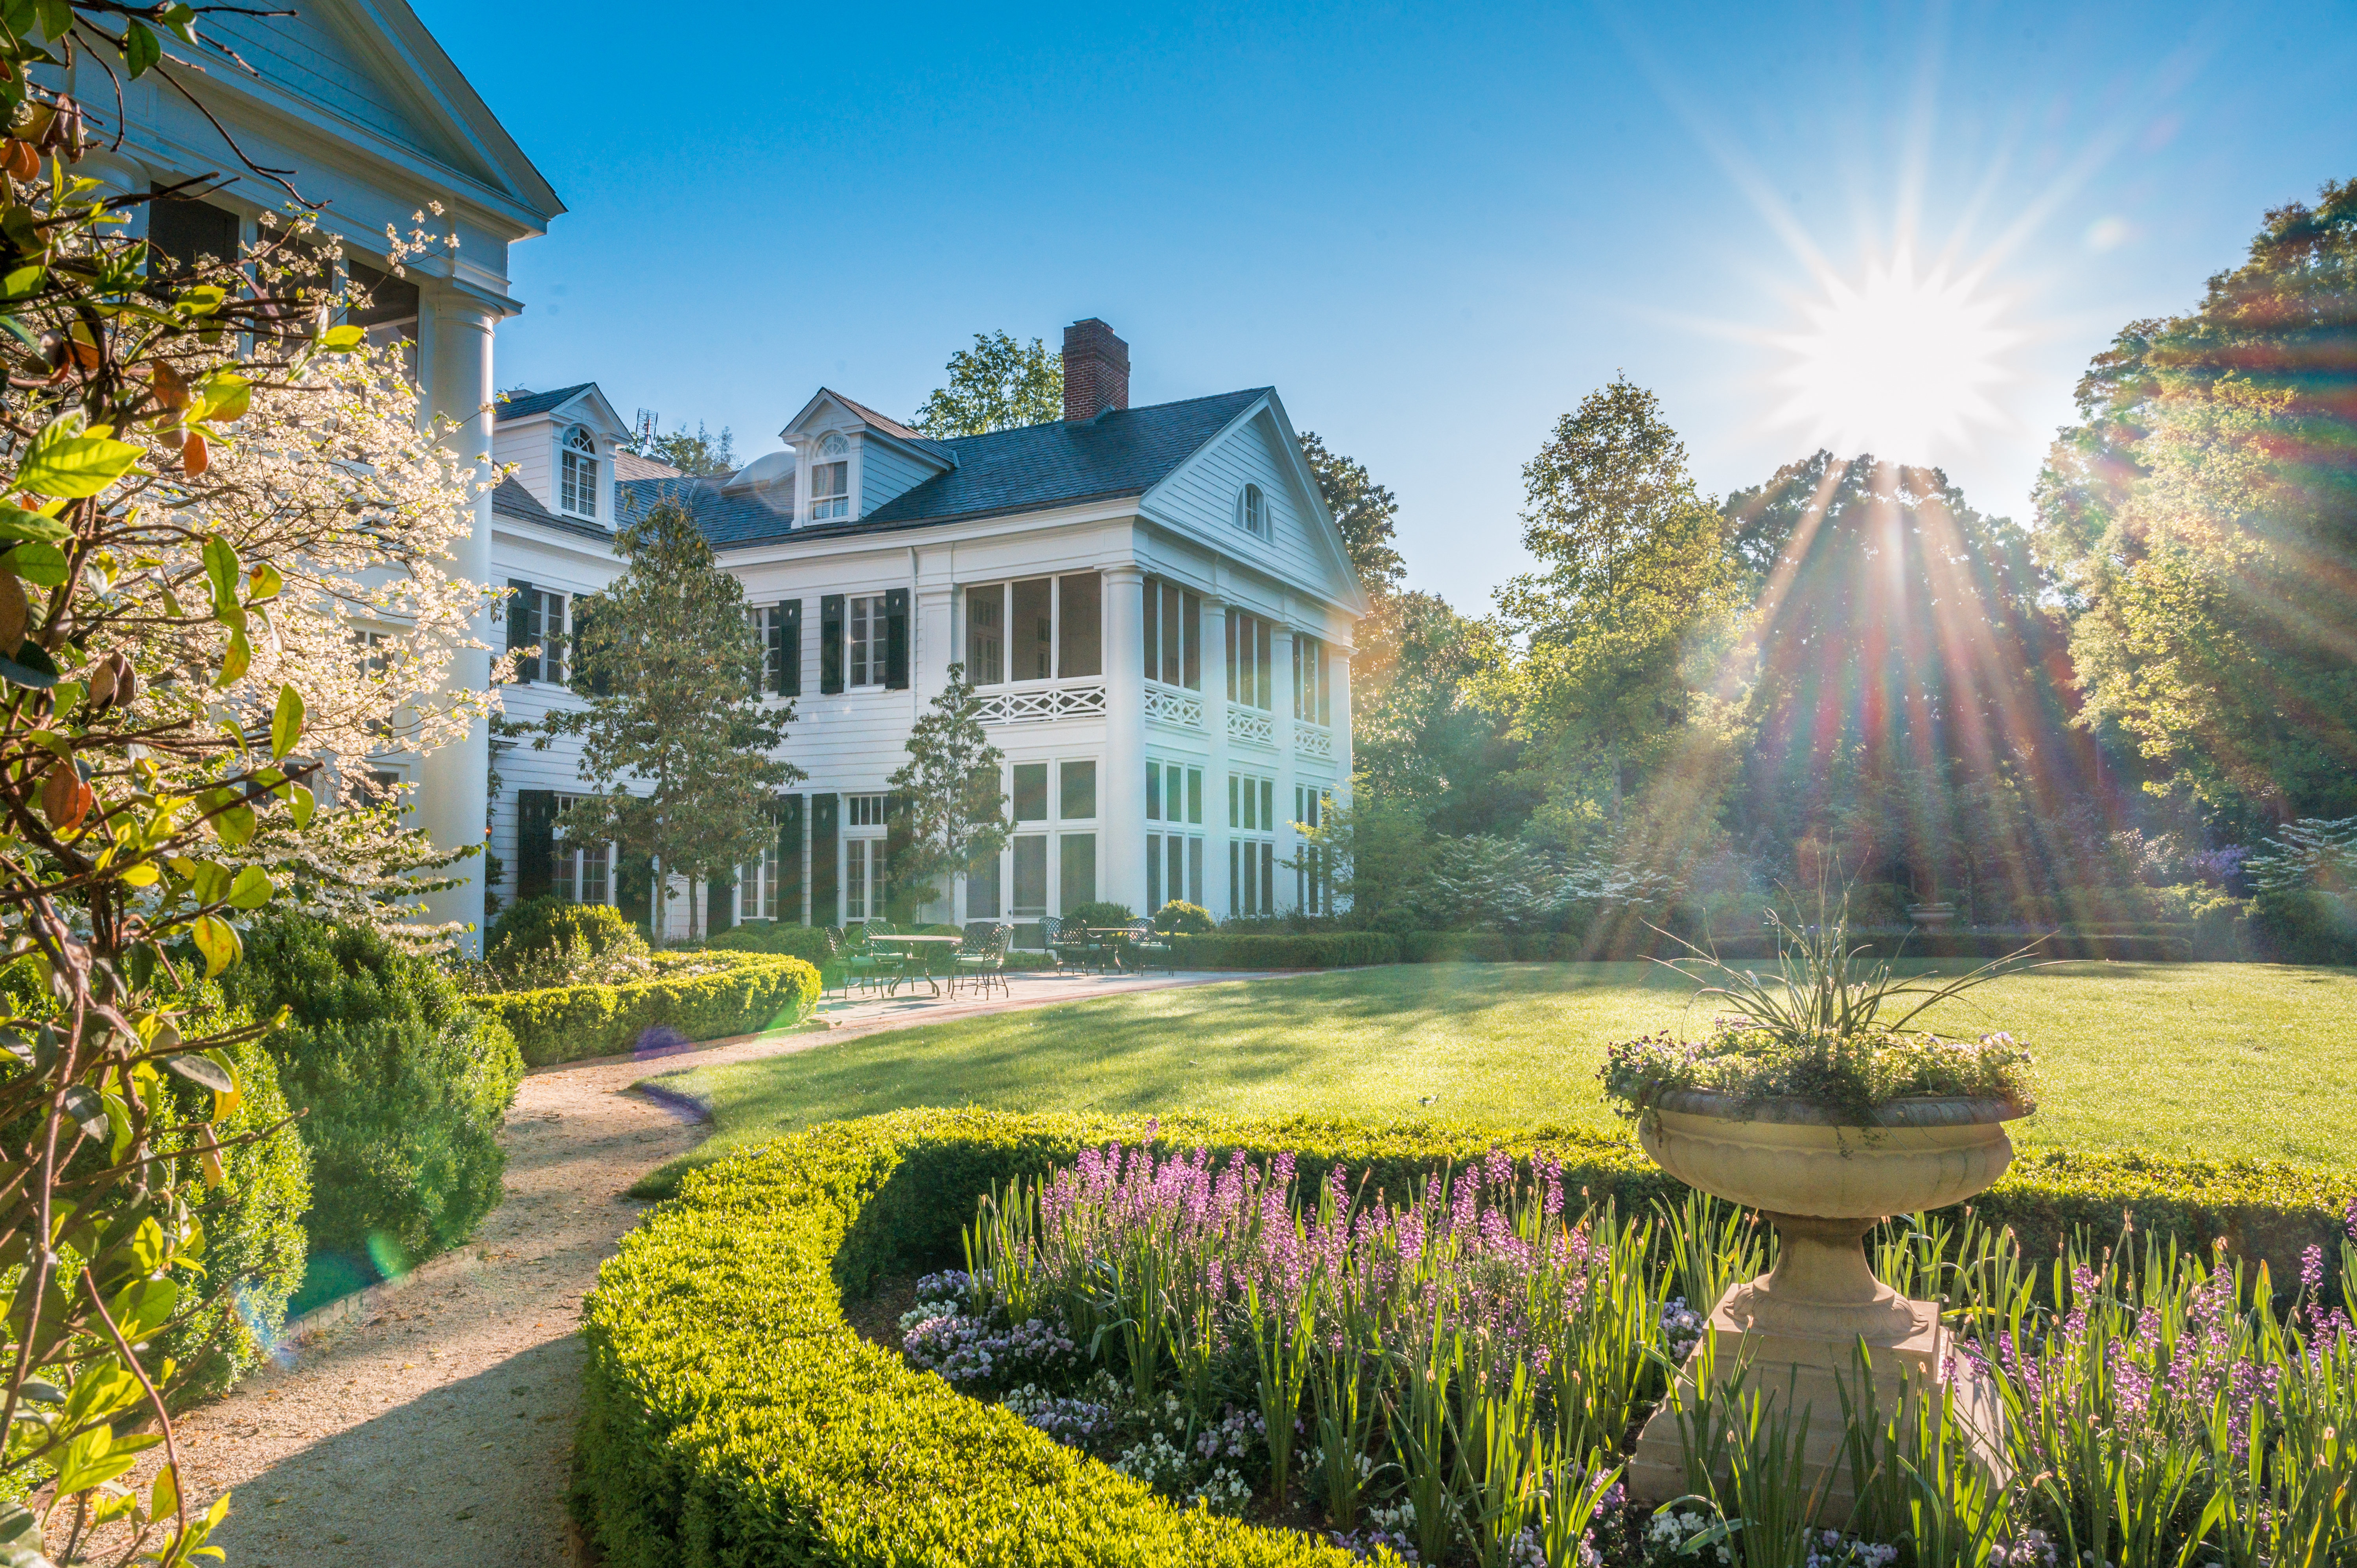 The Duke Mansion in Charlotte is a nonprofit bed and breakfast that also serves as an event space